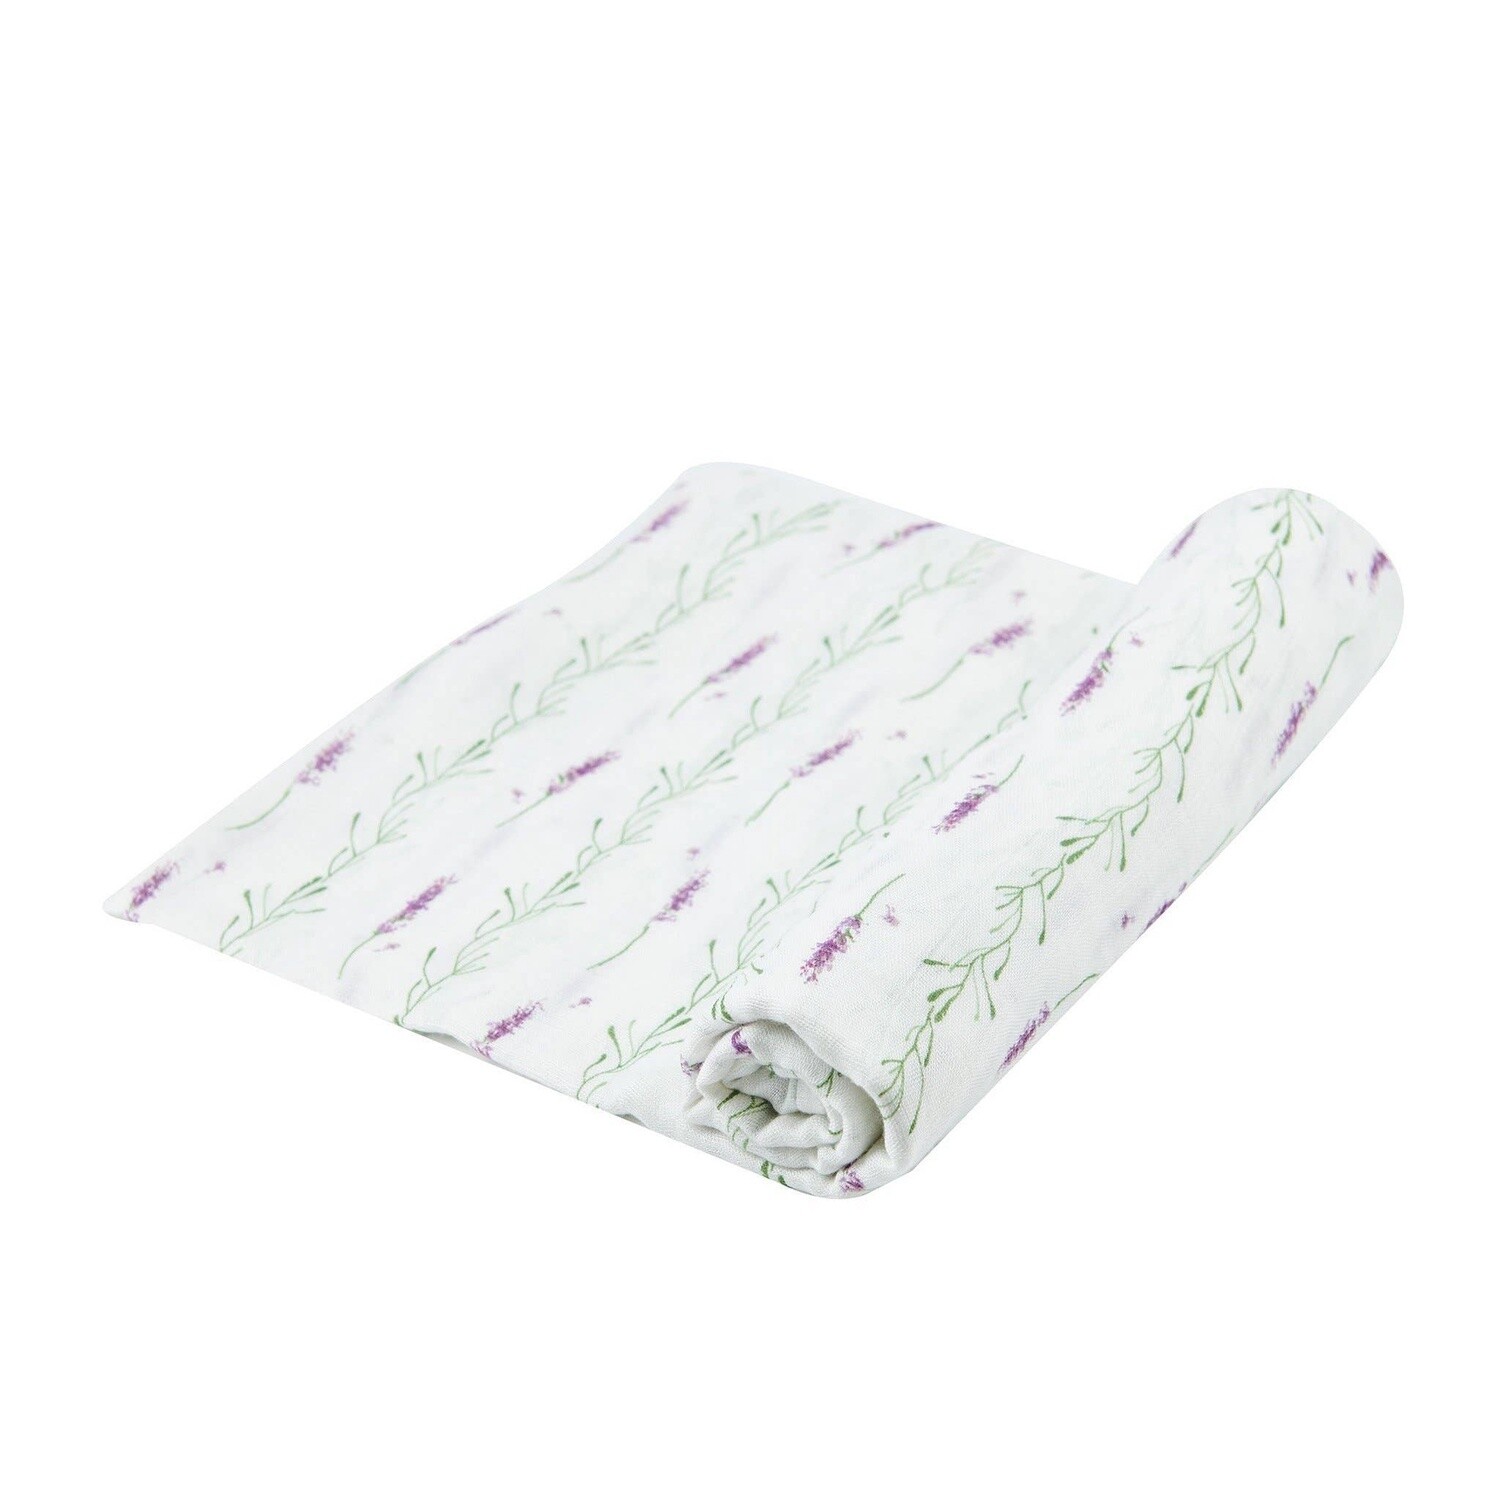 Newcastle Classics - Lavender Stems Bamboo muslin swaddle blanket